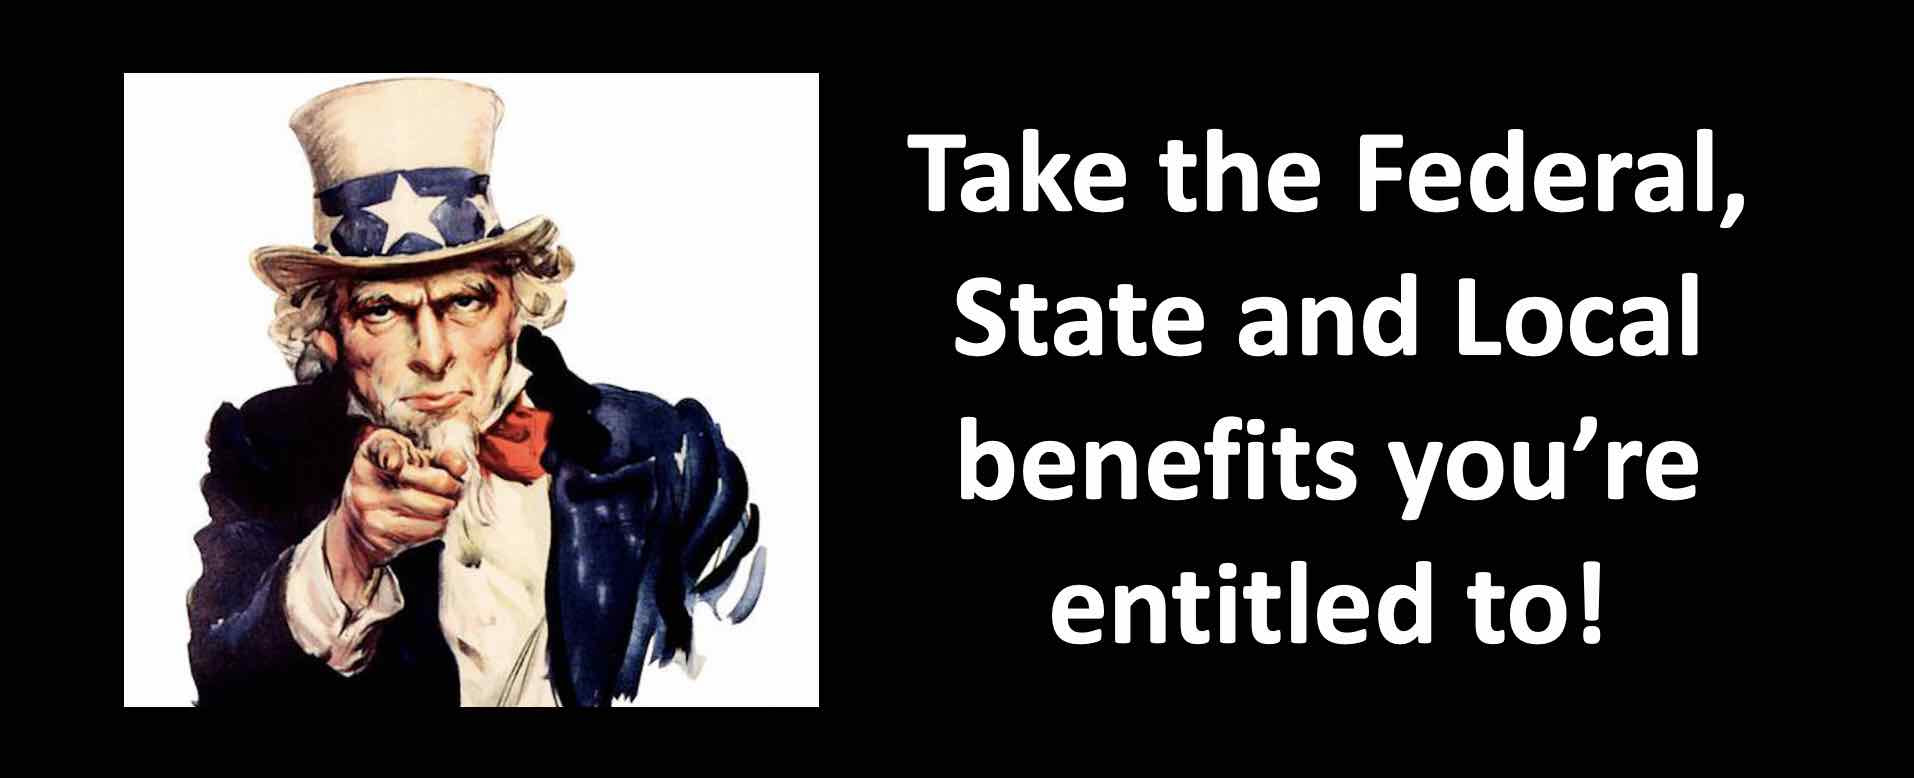 Take the Federal State and Local benefits you are entitled to.